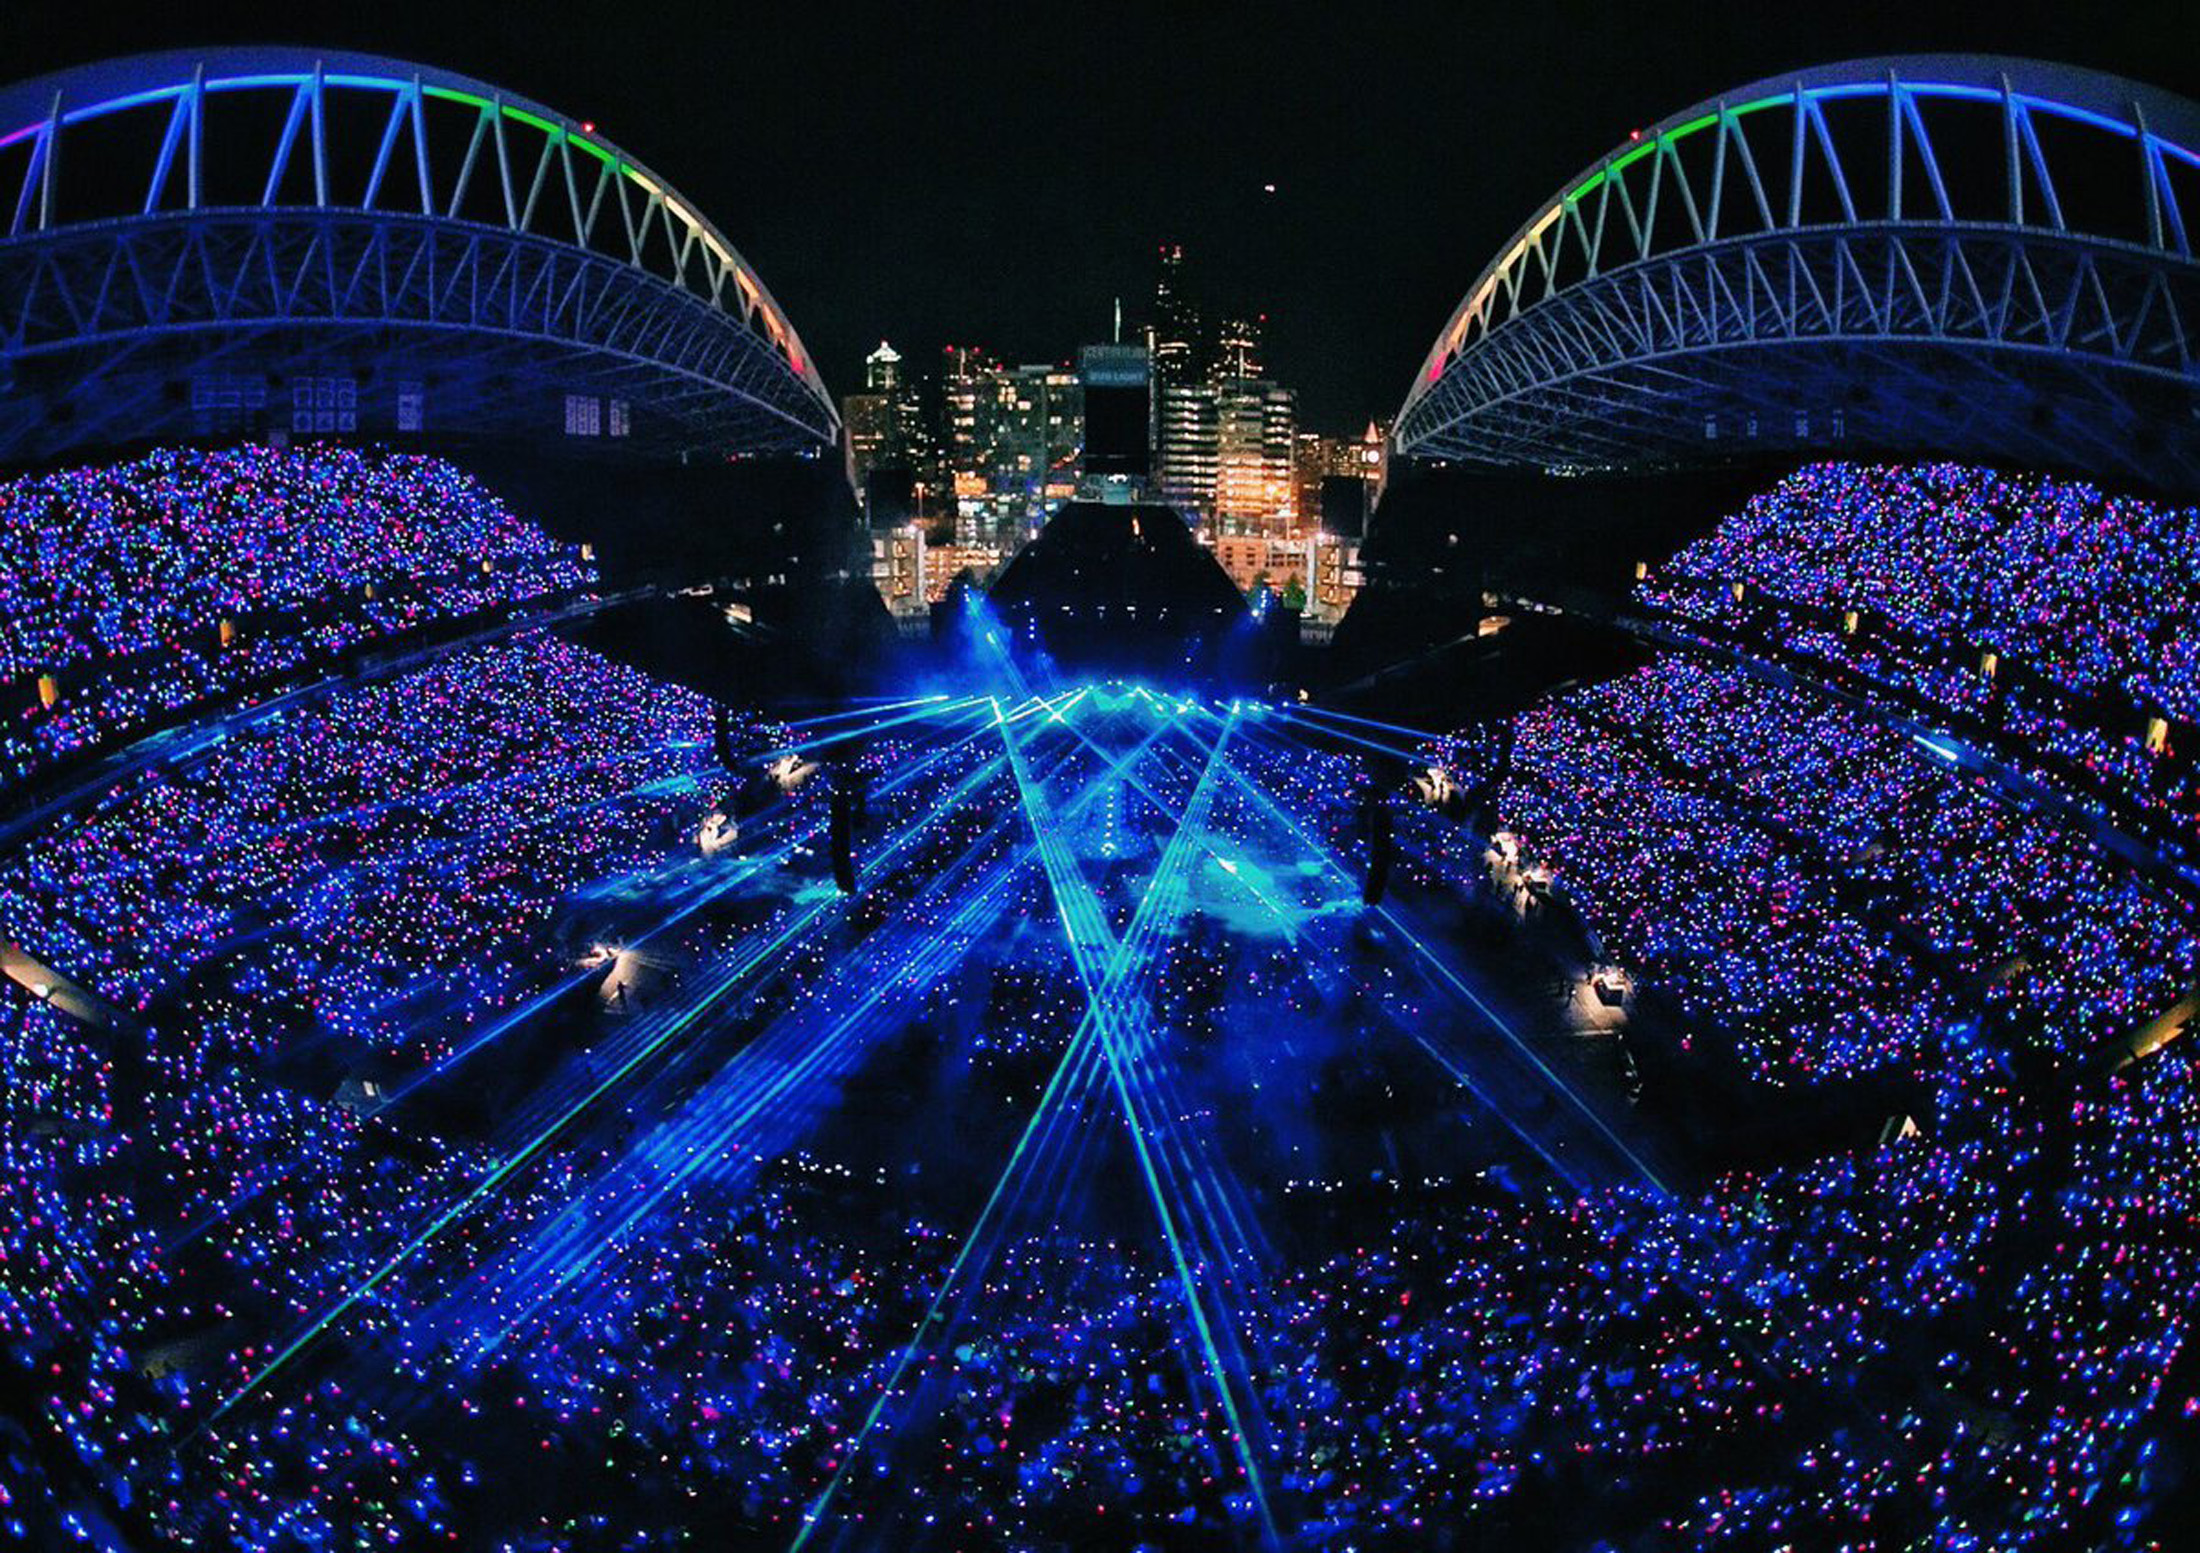 coldplay tour